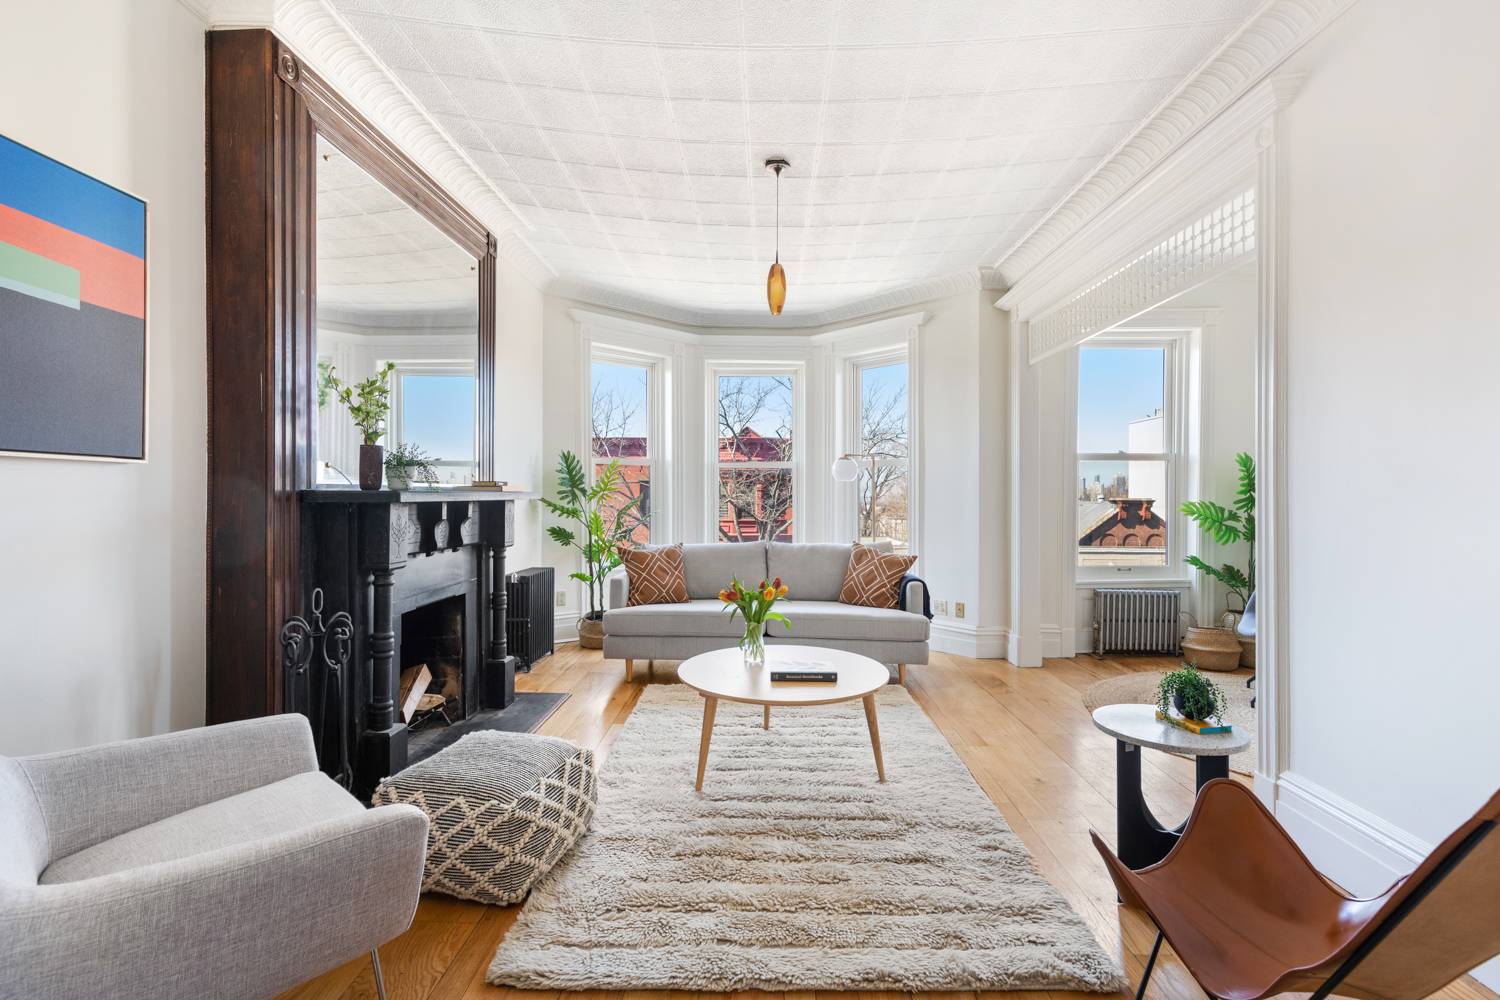 This bright, charming and spacious, two bedroom home plus home office nursery features high ceilings, original woodwork and flooring, a wood burning fireplace, gorgeous view of the Manhattan skyline, and ...